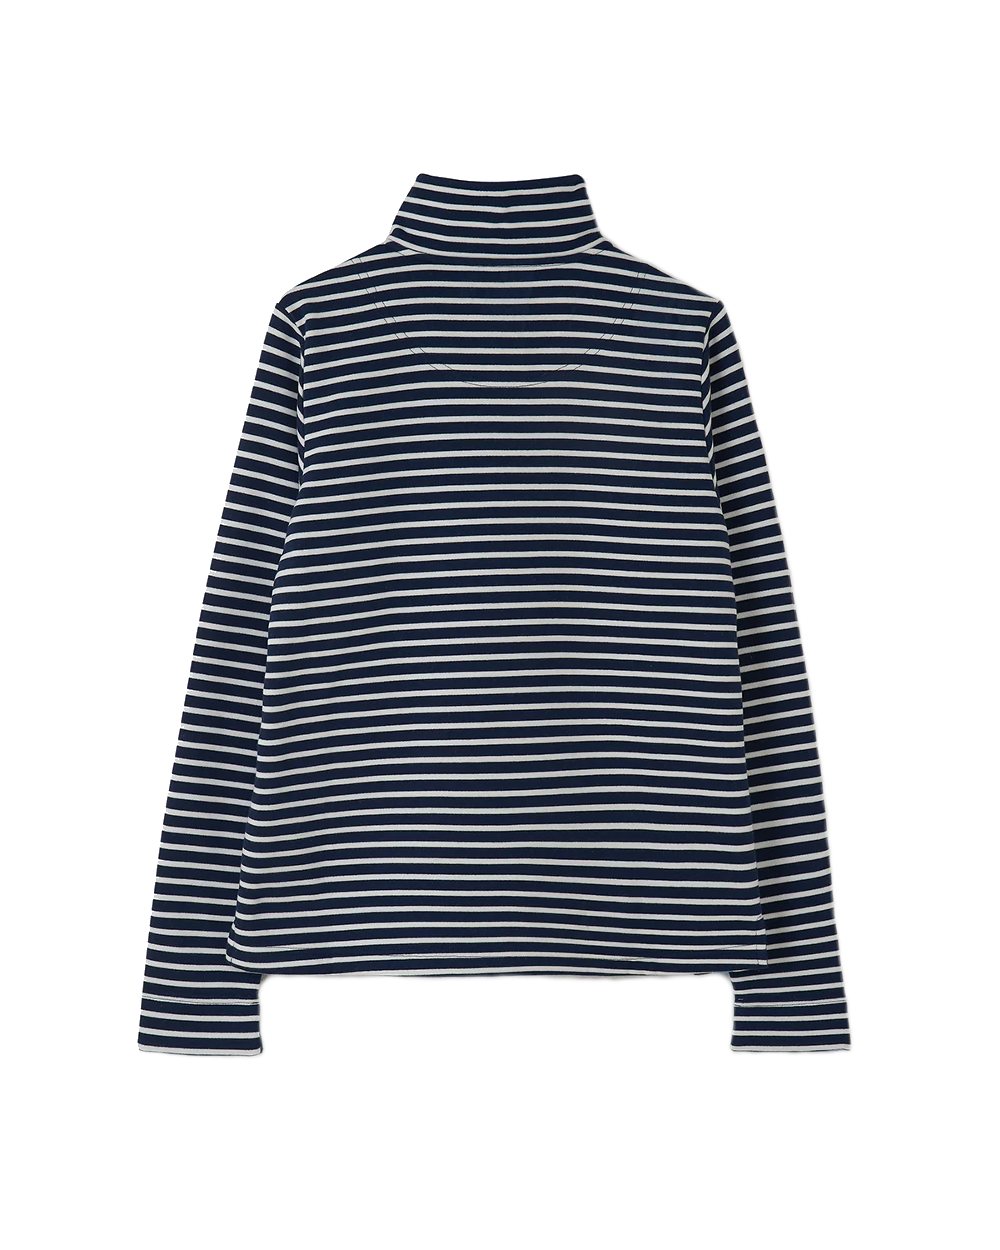 Lighthouse Shore Jersey Top in Midnight Stripe 